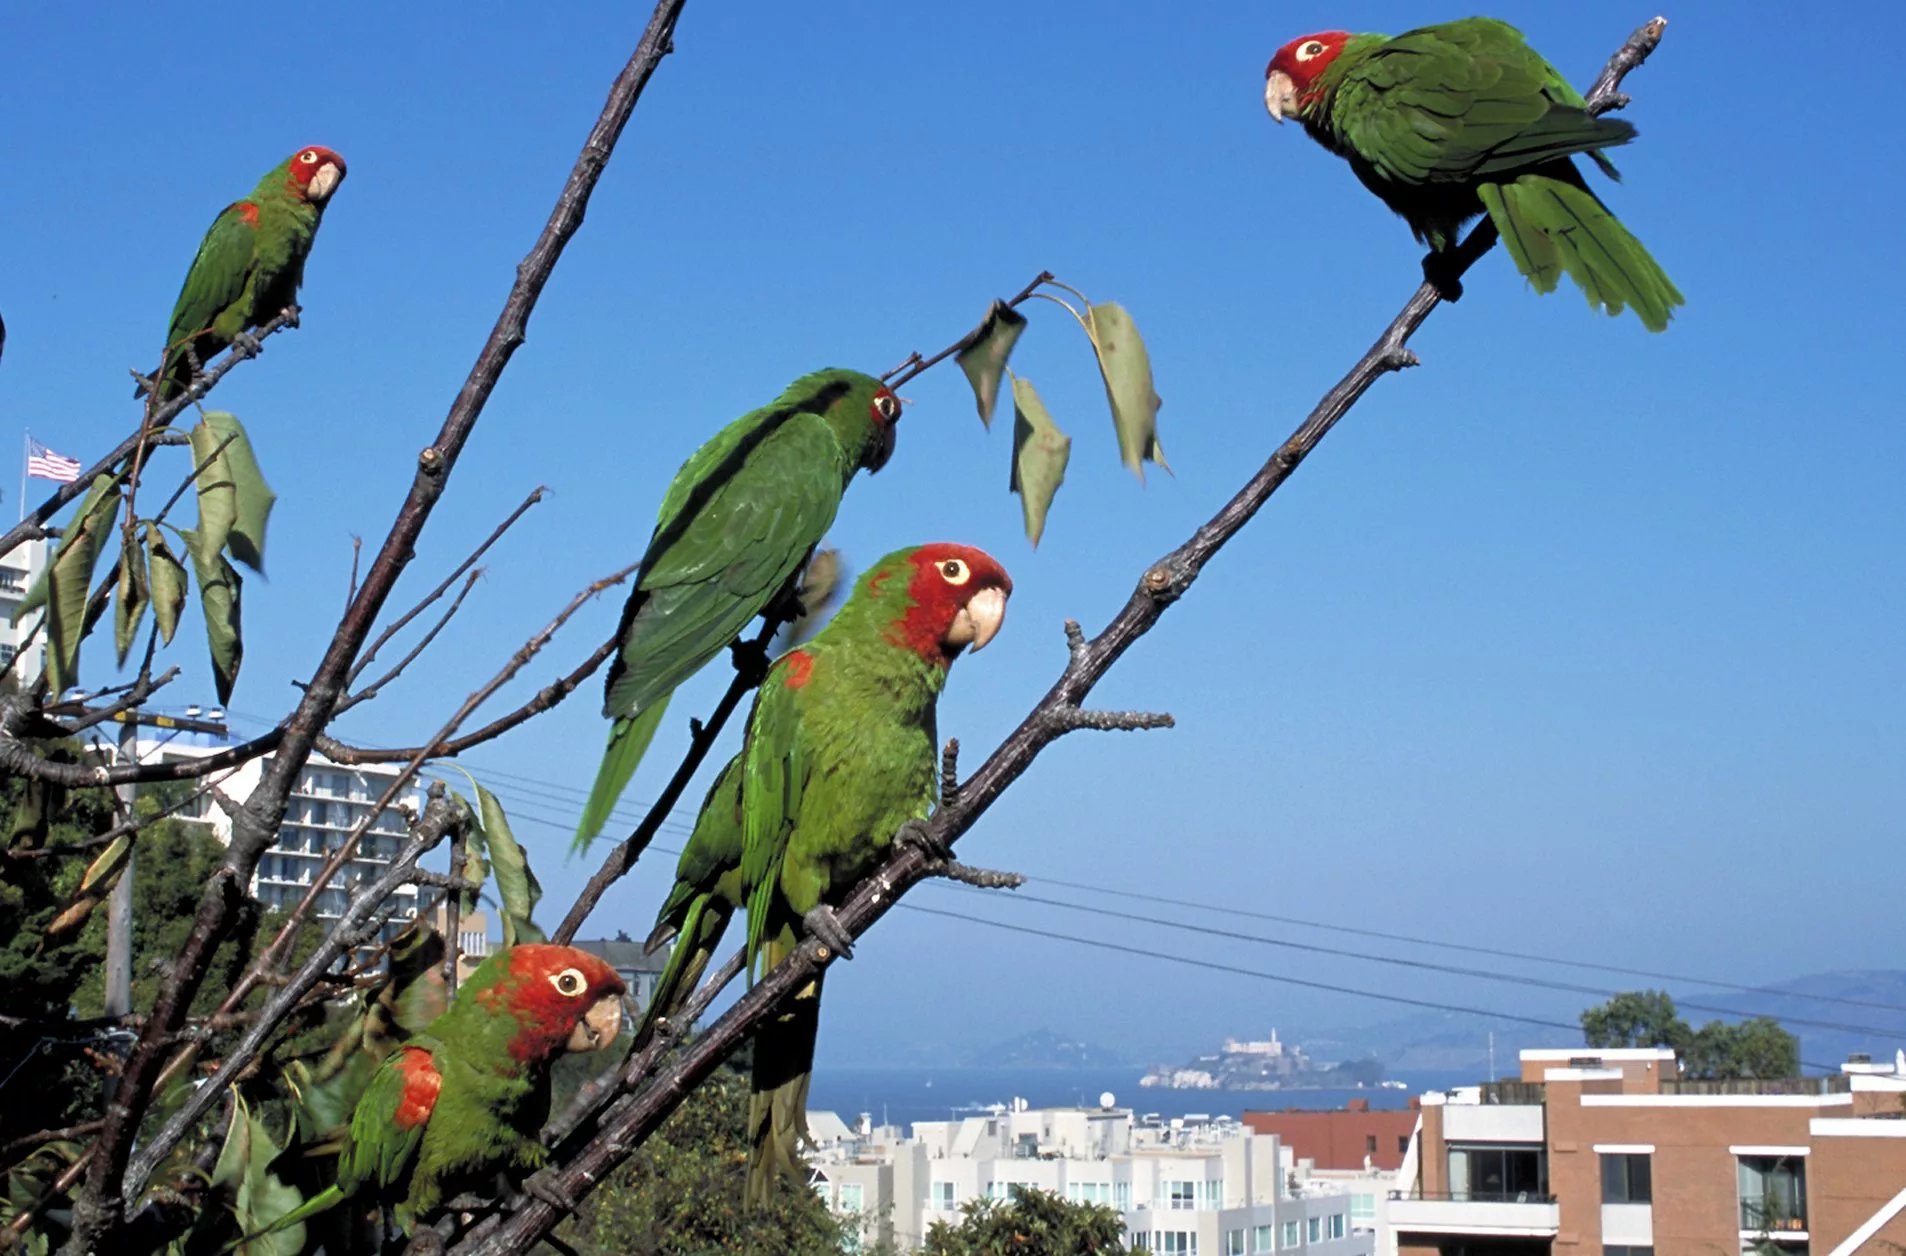 Four red and green parrots on tree branches with North Beach, San Francisco Bay & Alcatraz Island visible in the background.